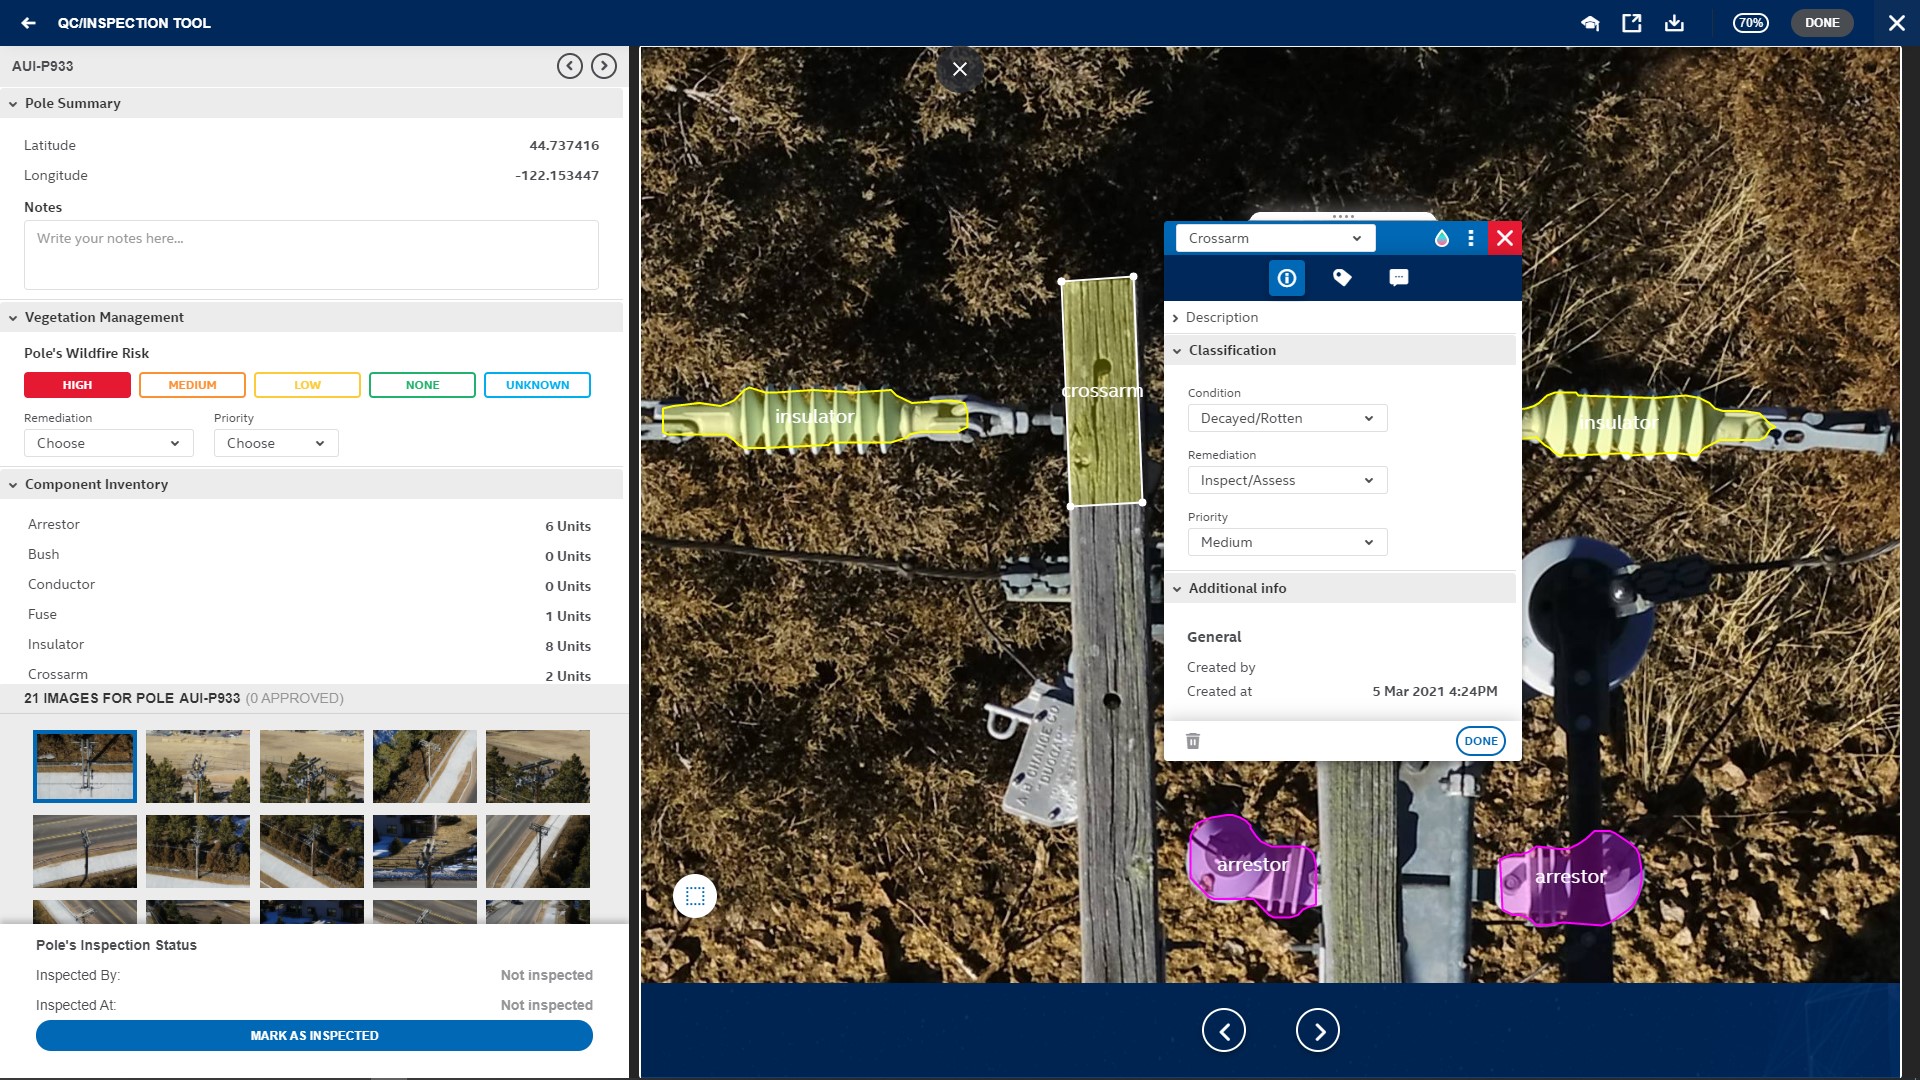 The Intel Geospatial Platform “plug-in” analytics architecture enables AI-assisted workflows for visual asset inspections